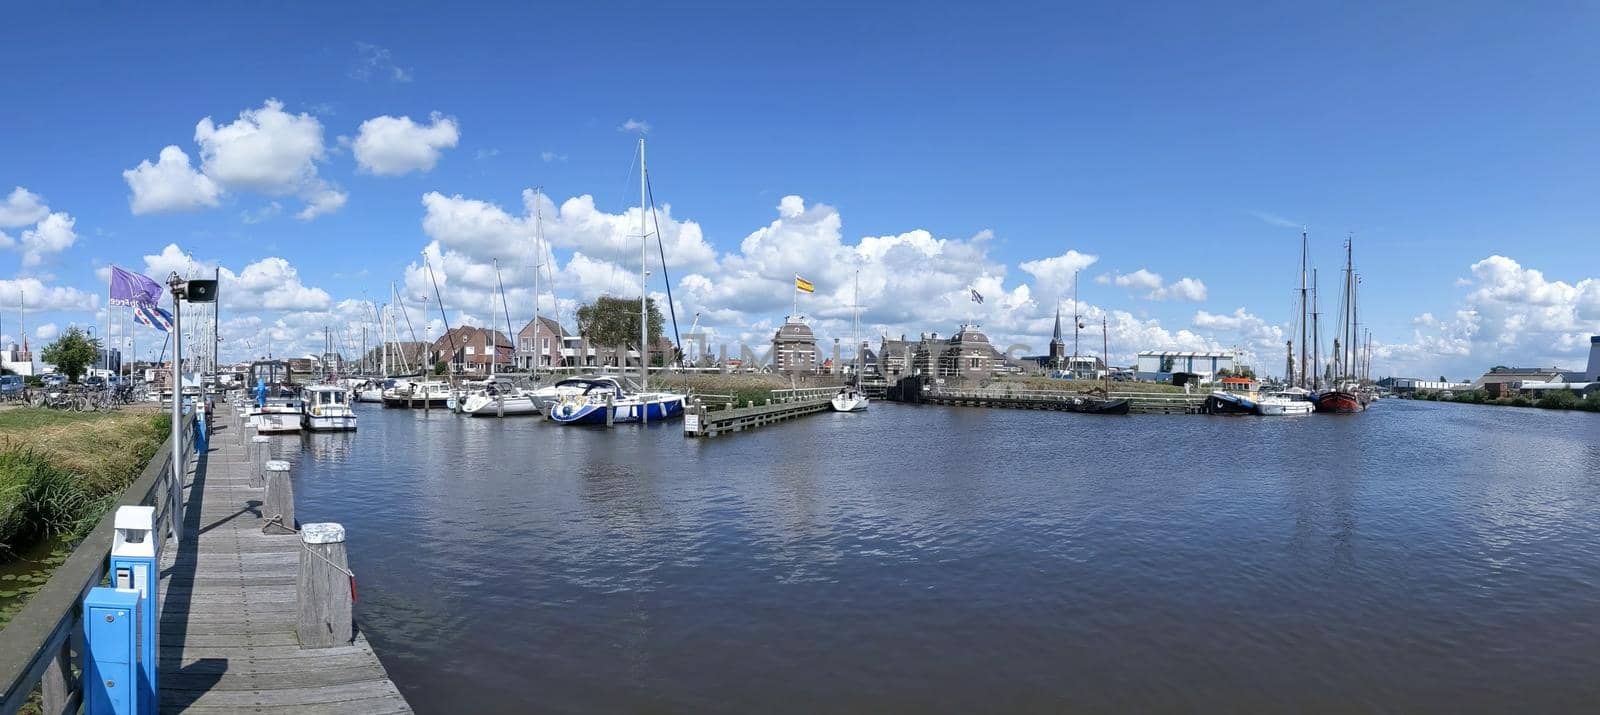 Canal lock panorama in Lemmer, Friesland The Netherlands